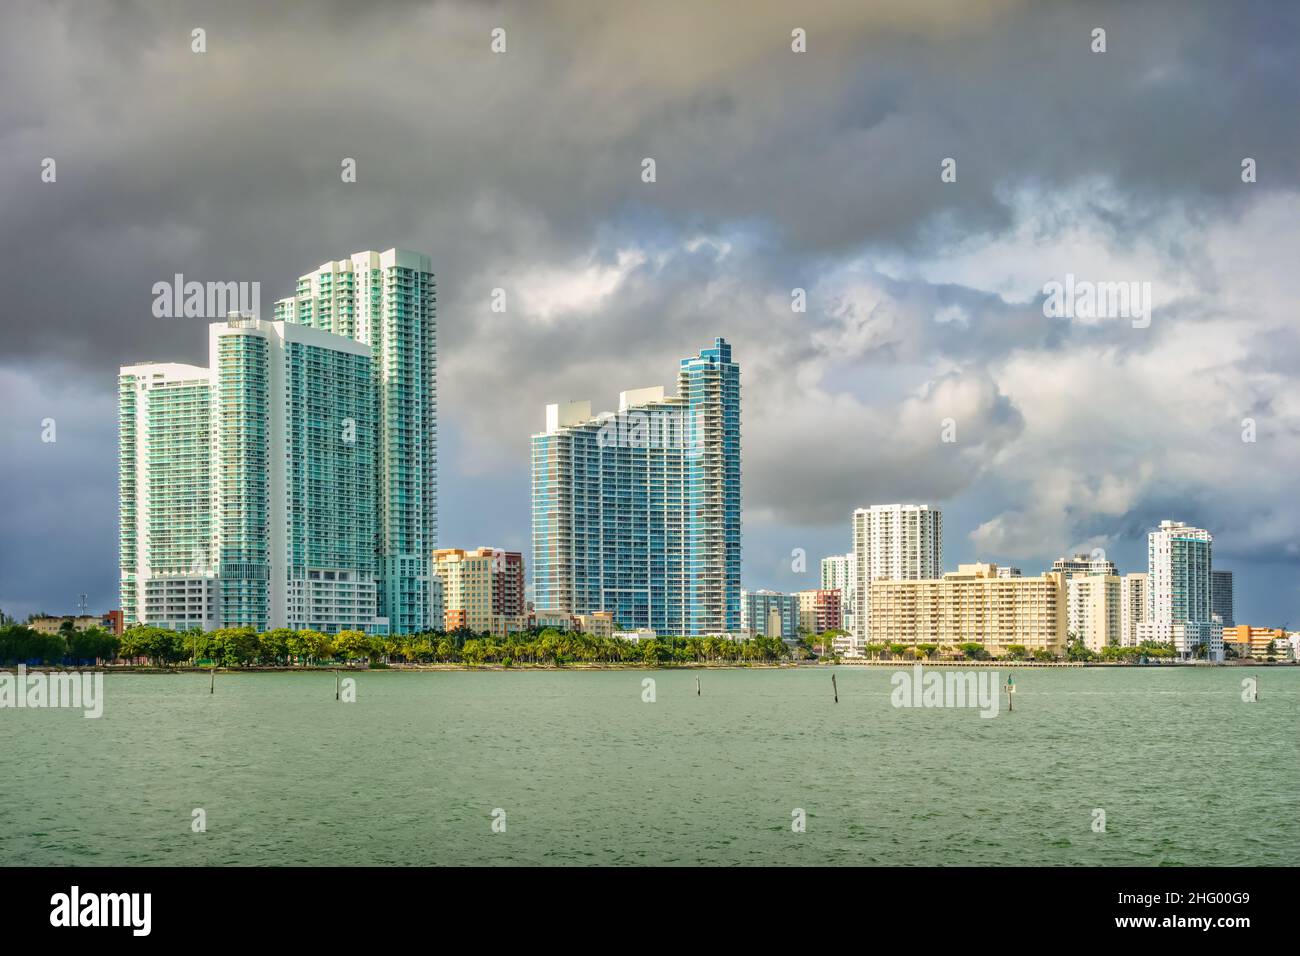 Condo towers on the waterfront in Miami Florida USA Stock Photo